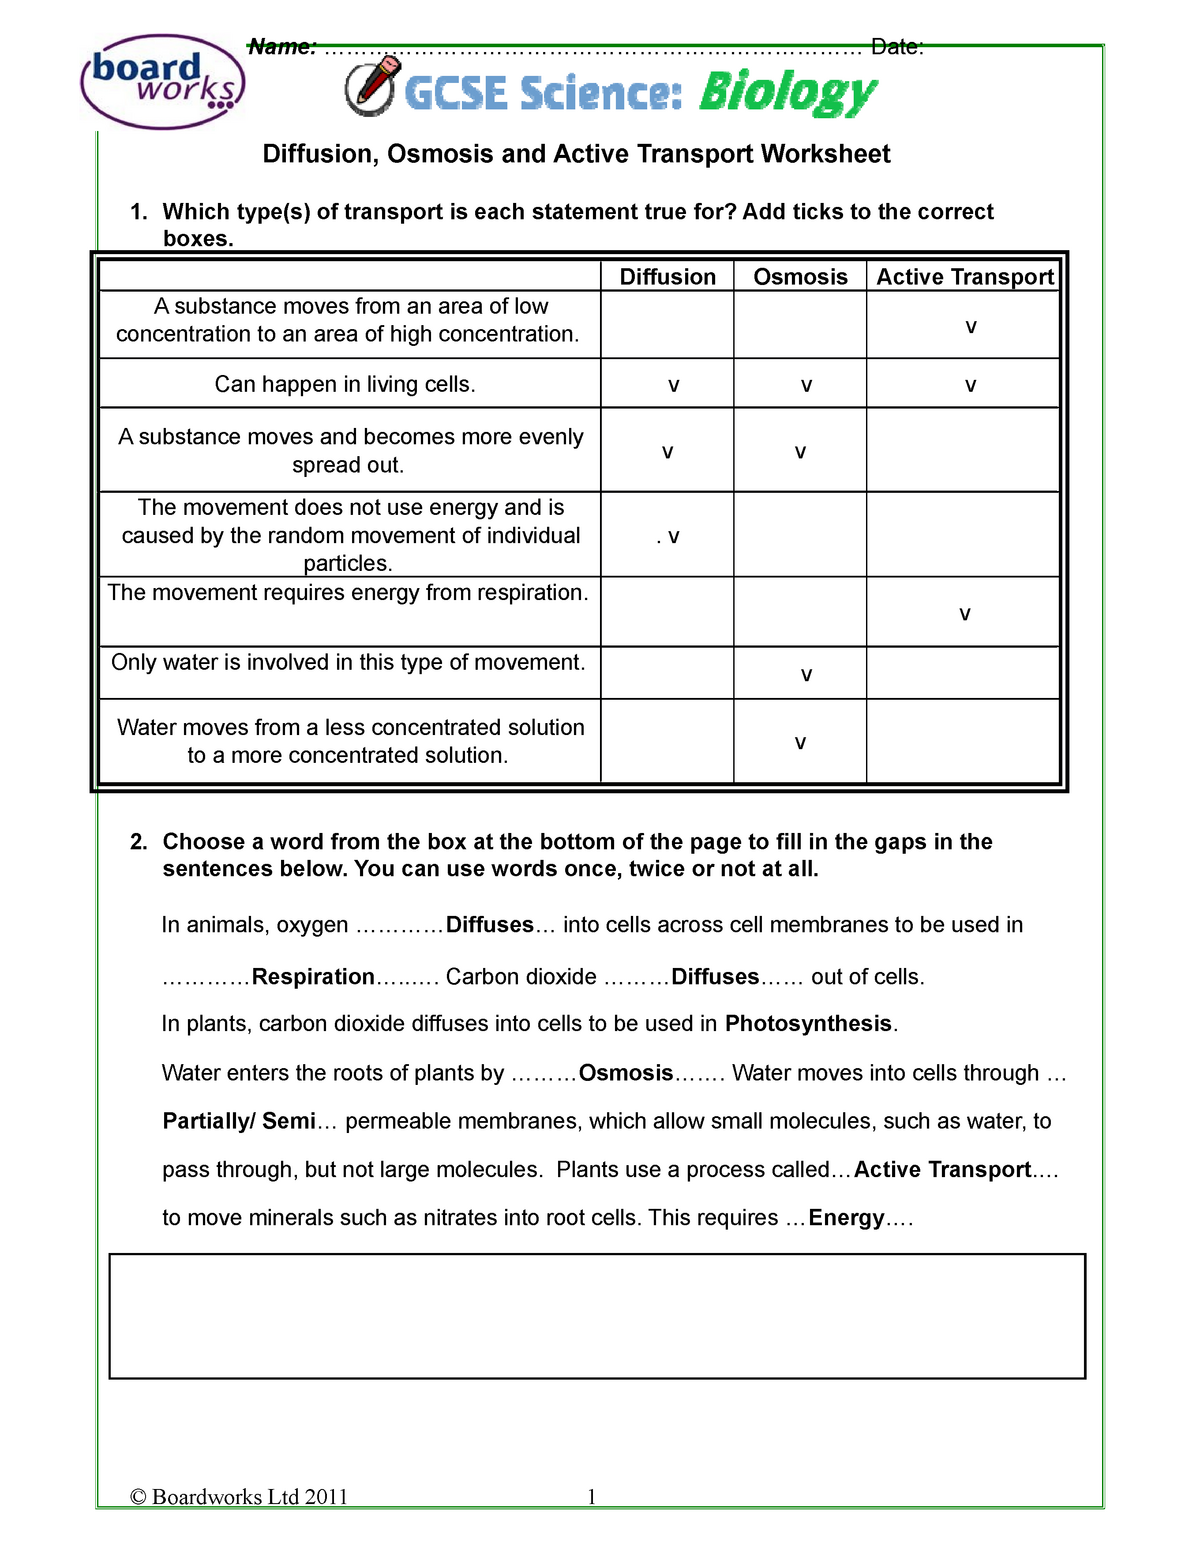 Diffusion Osmosis and Active Transport Worksheet F20 - Name Pertaining To Cell Transport Worksheet Answers